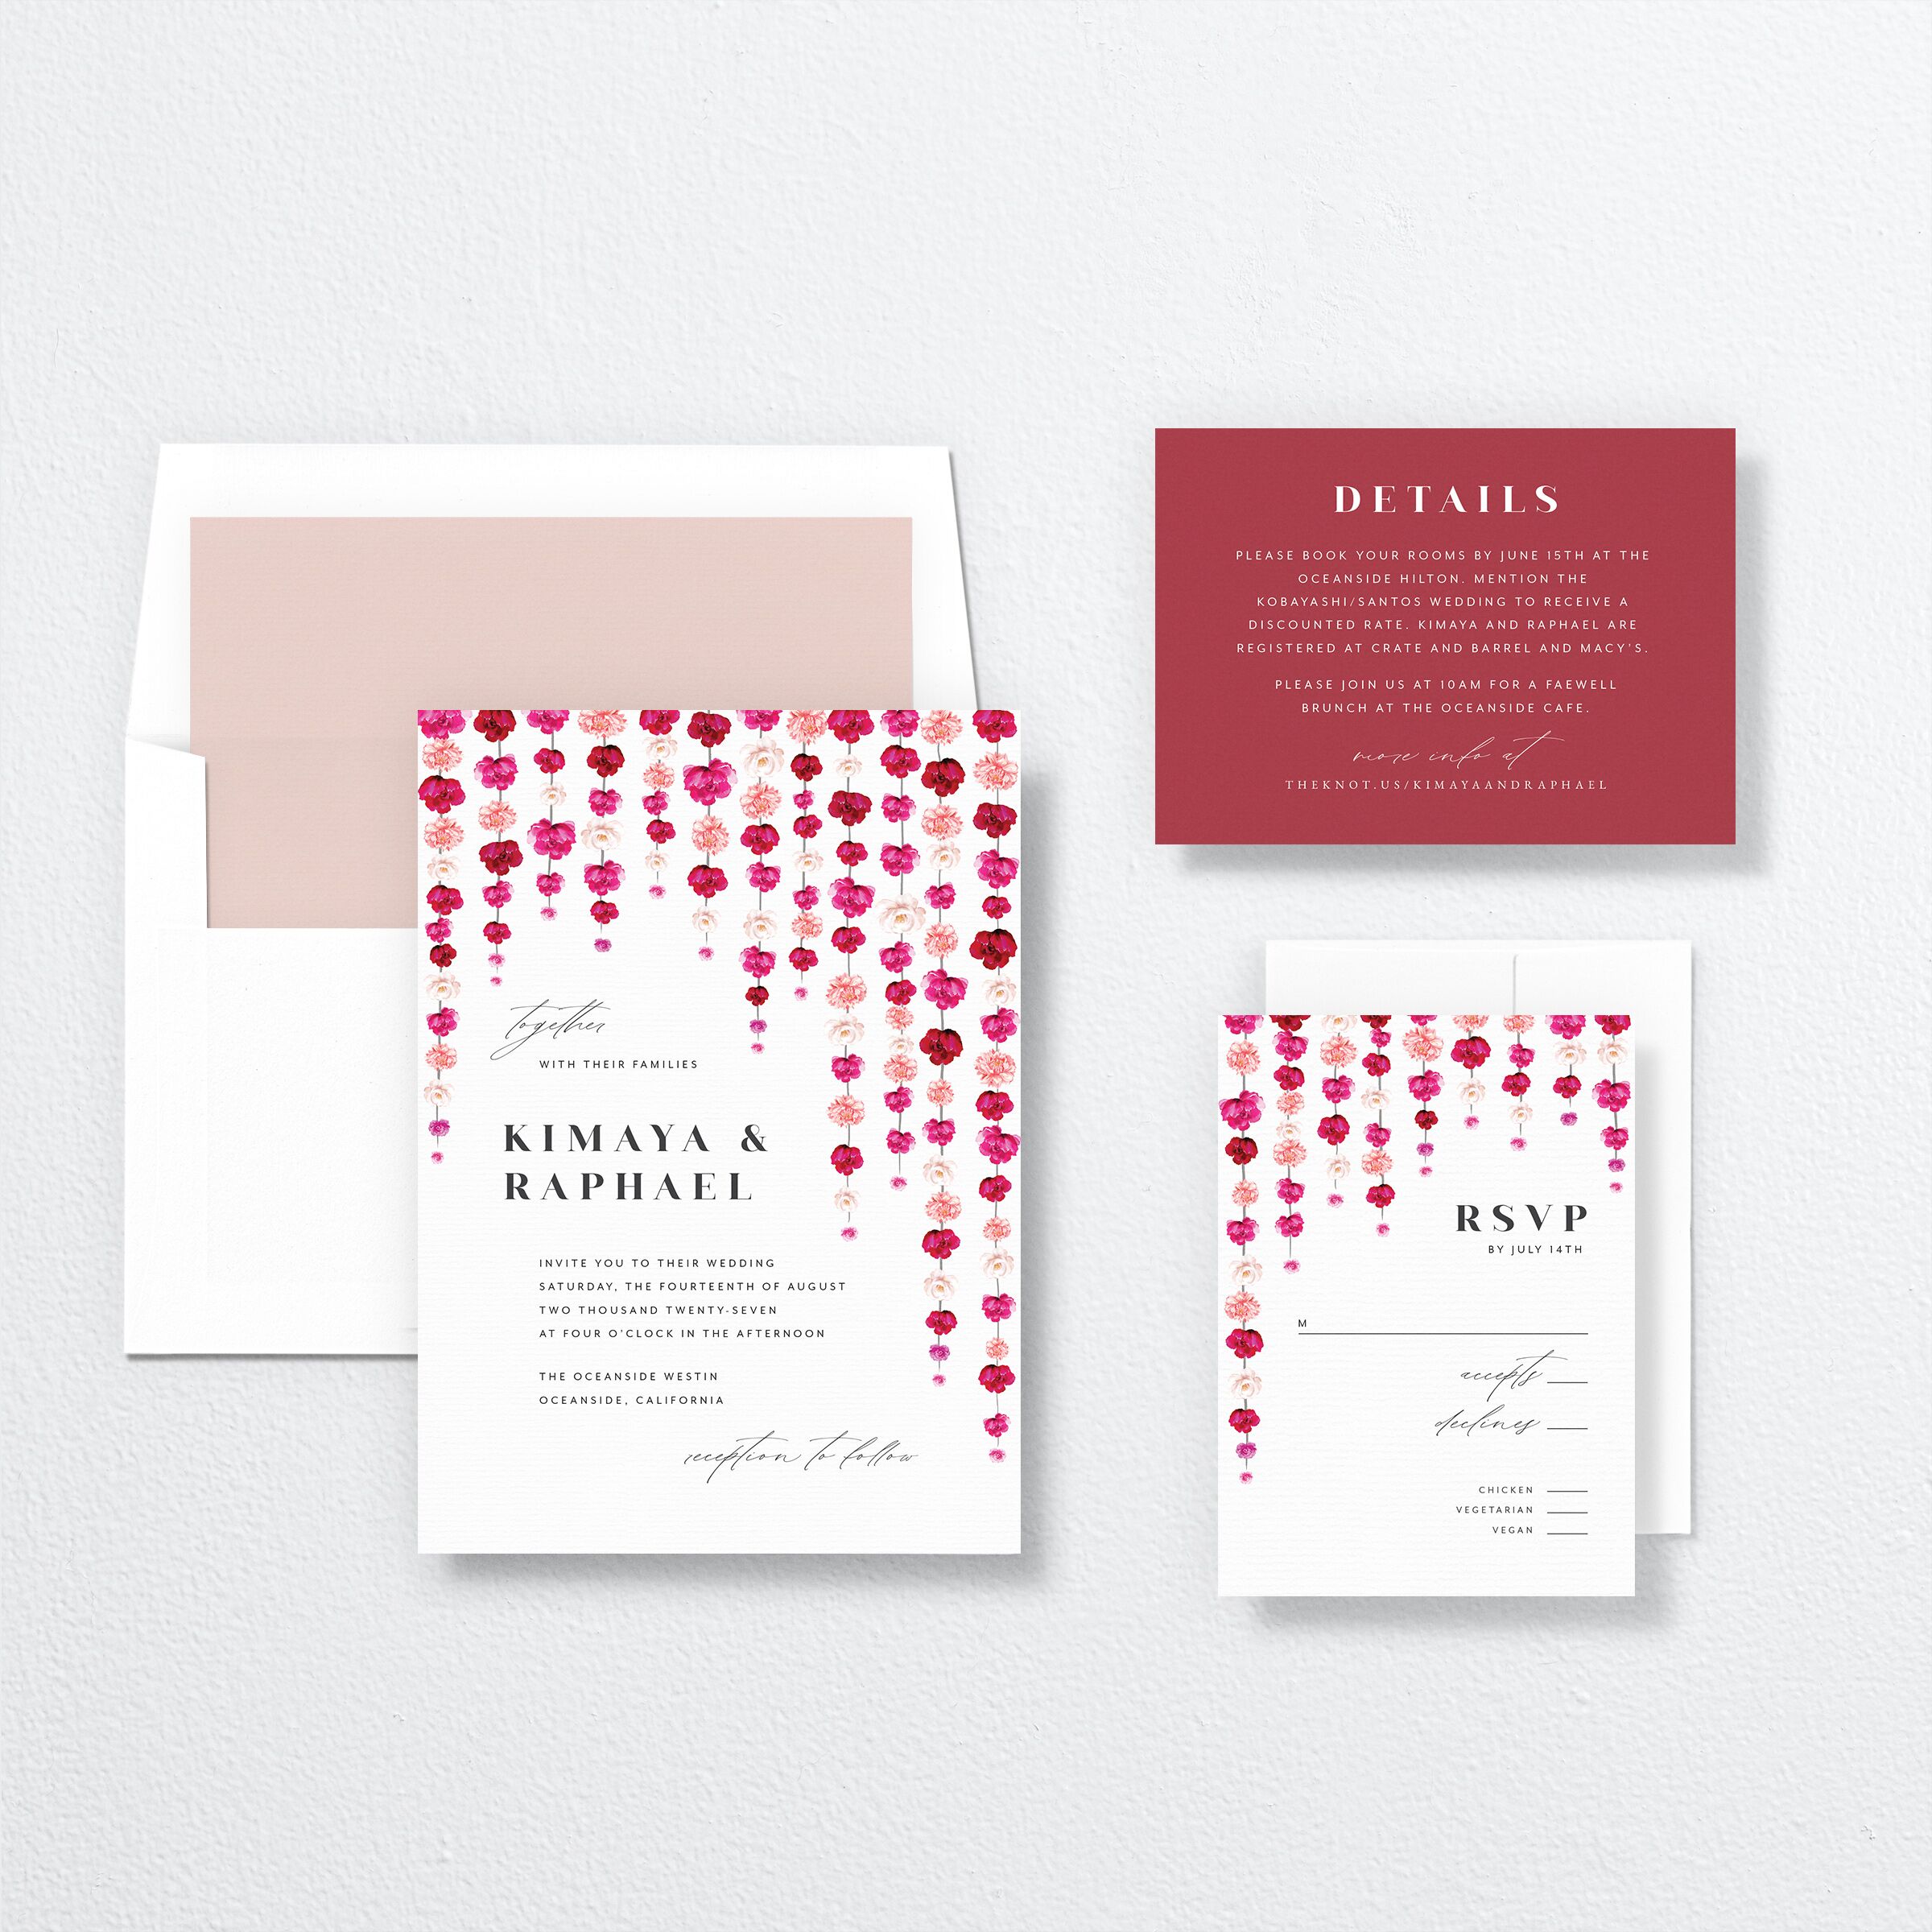 Floral Canopy Wedding Invitations suite in red